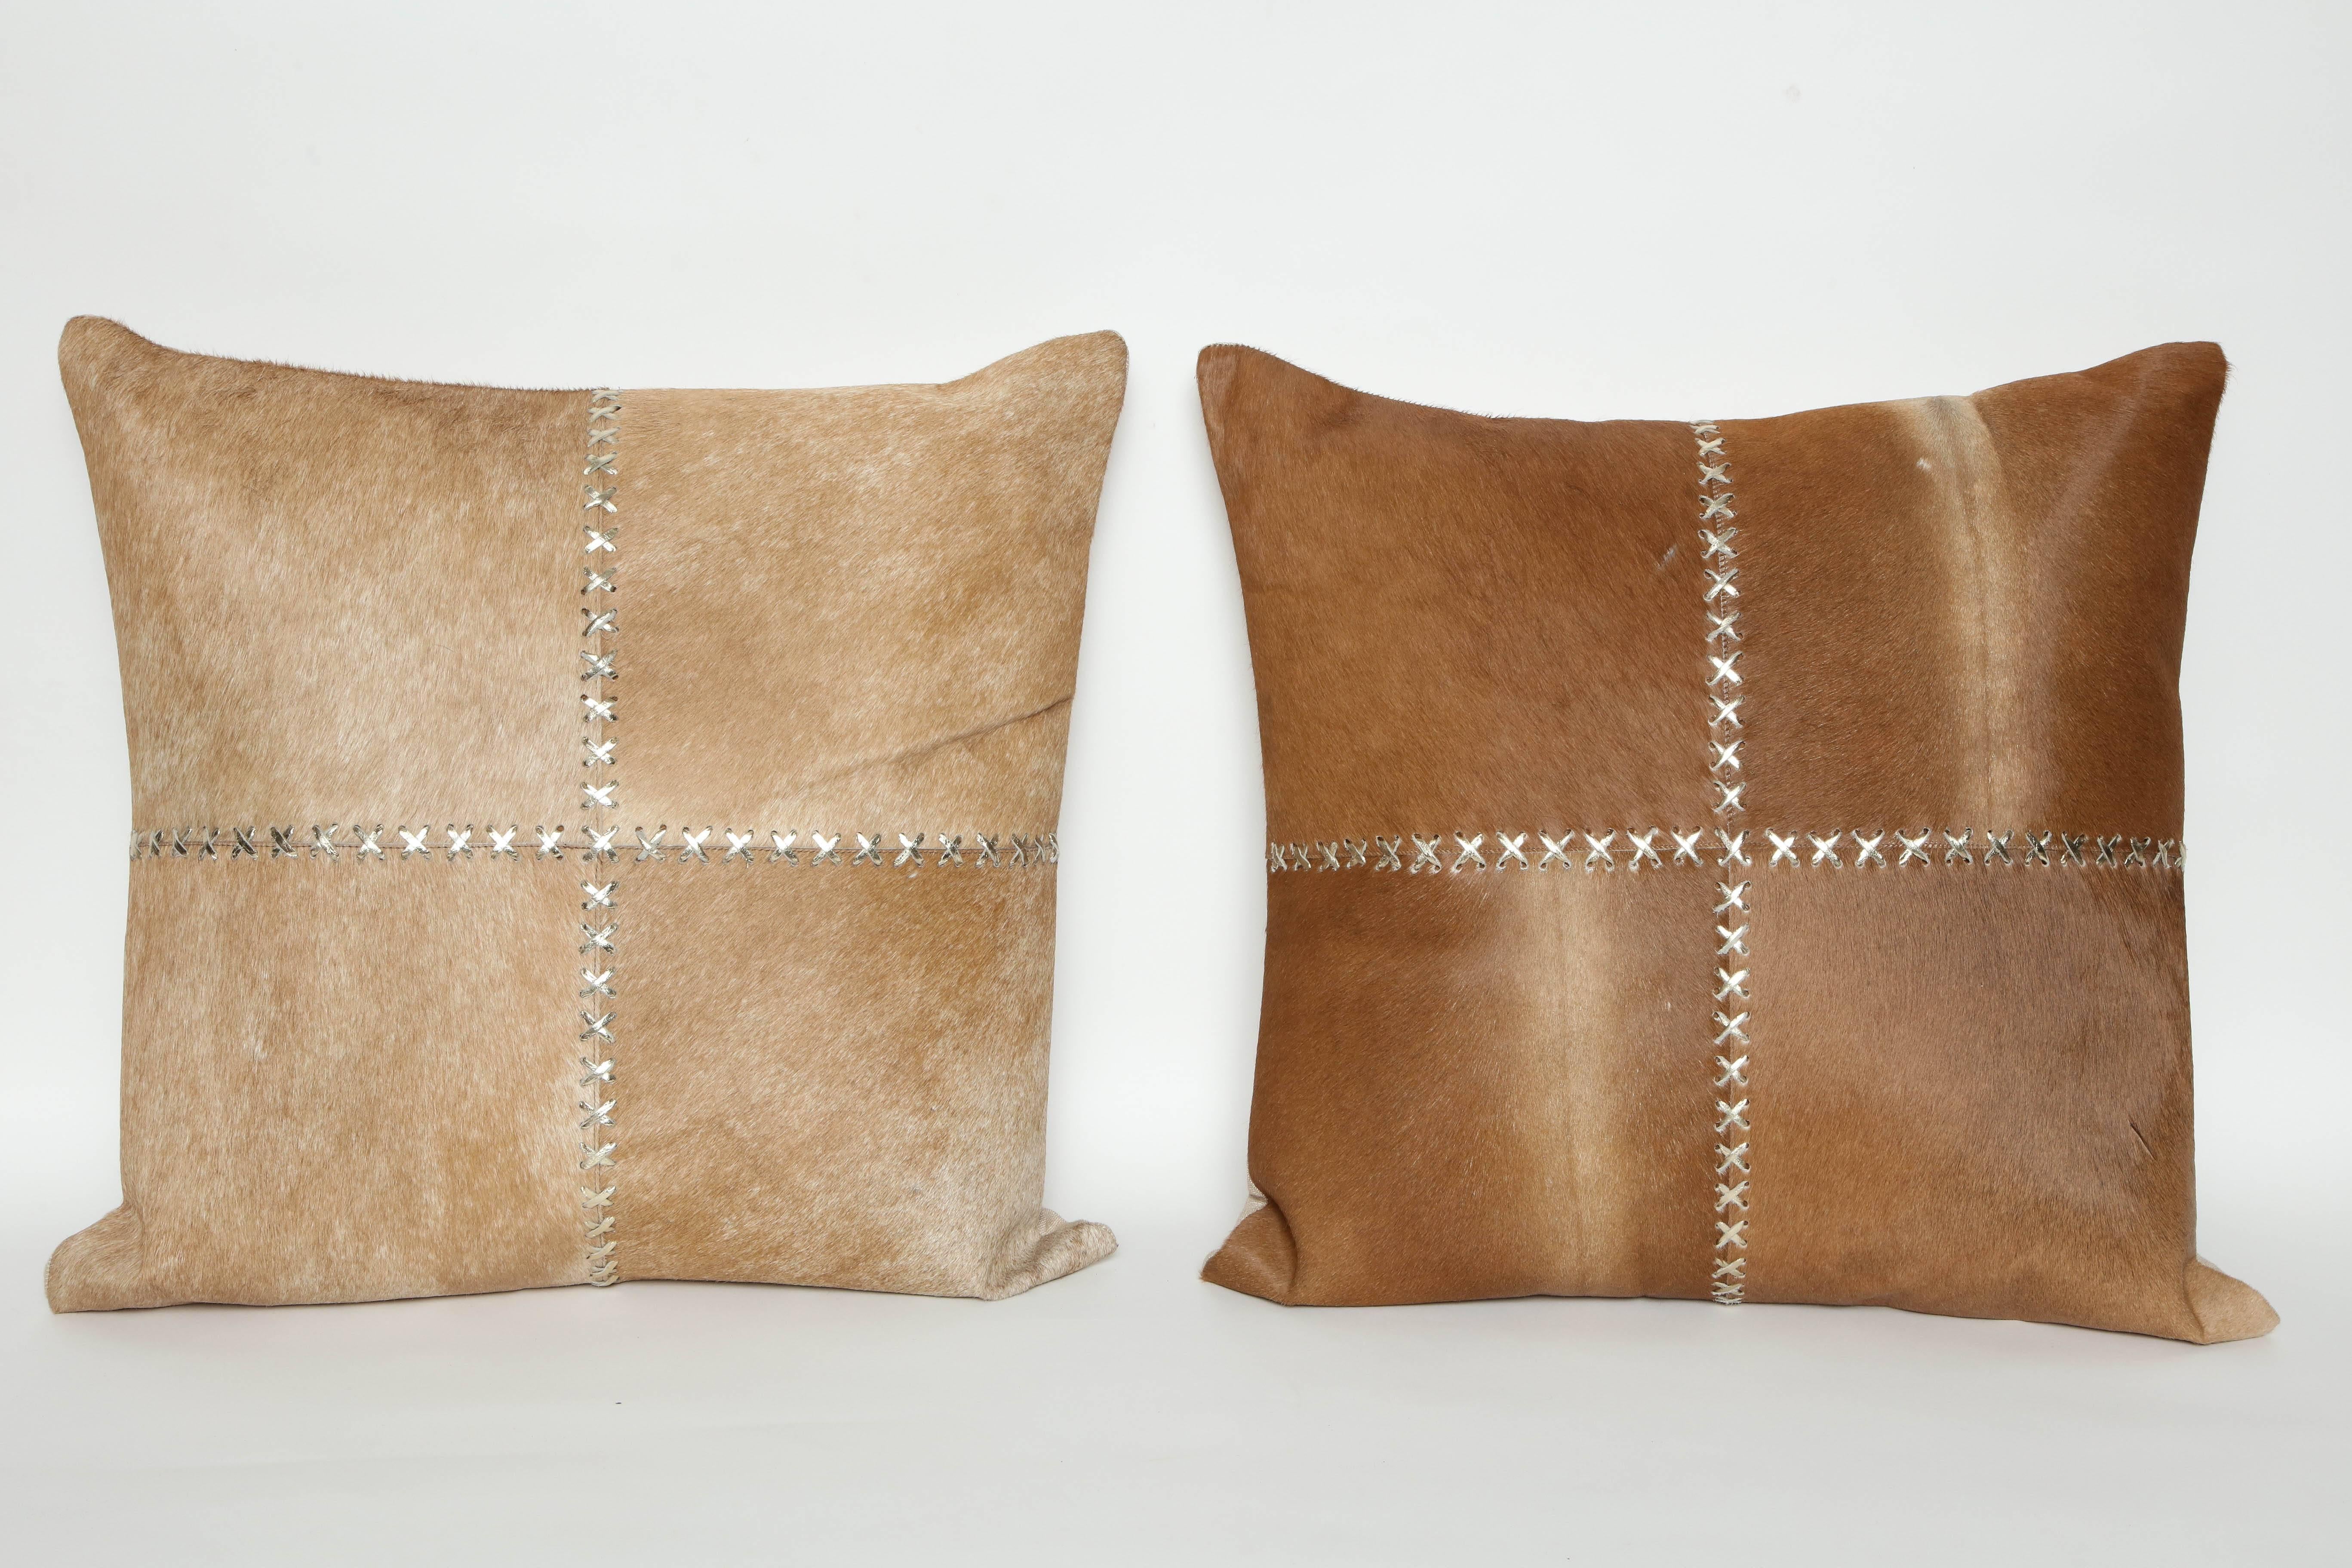 Pair of custom-made caramel colored hide pillows with gold metallic X-lace up and cotton/linen backs, zipper closure. Feather/down inserts.